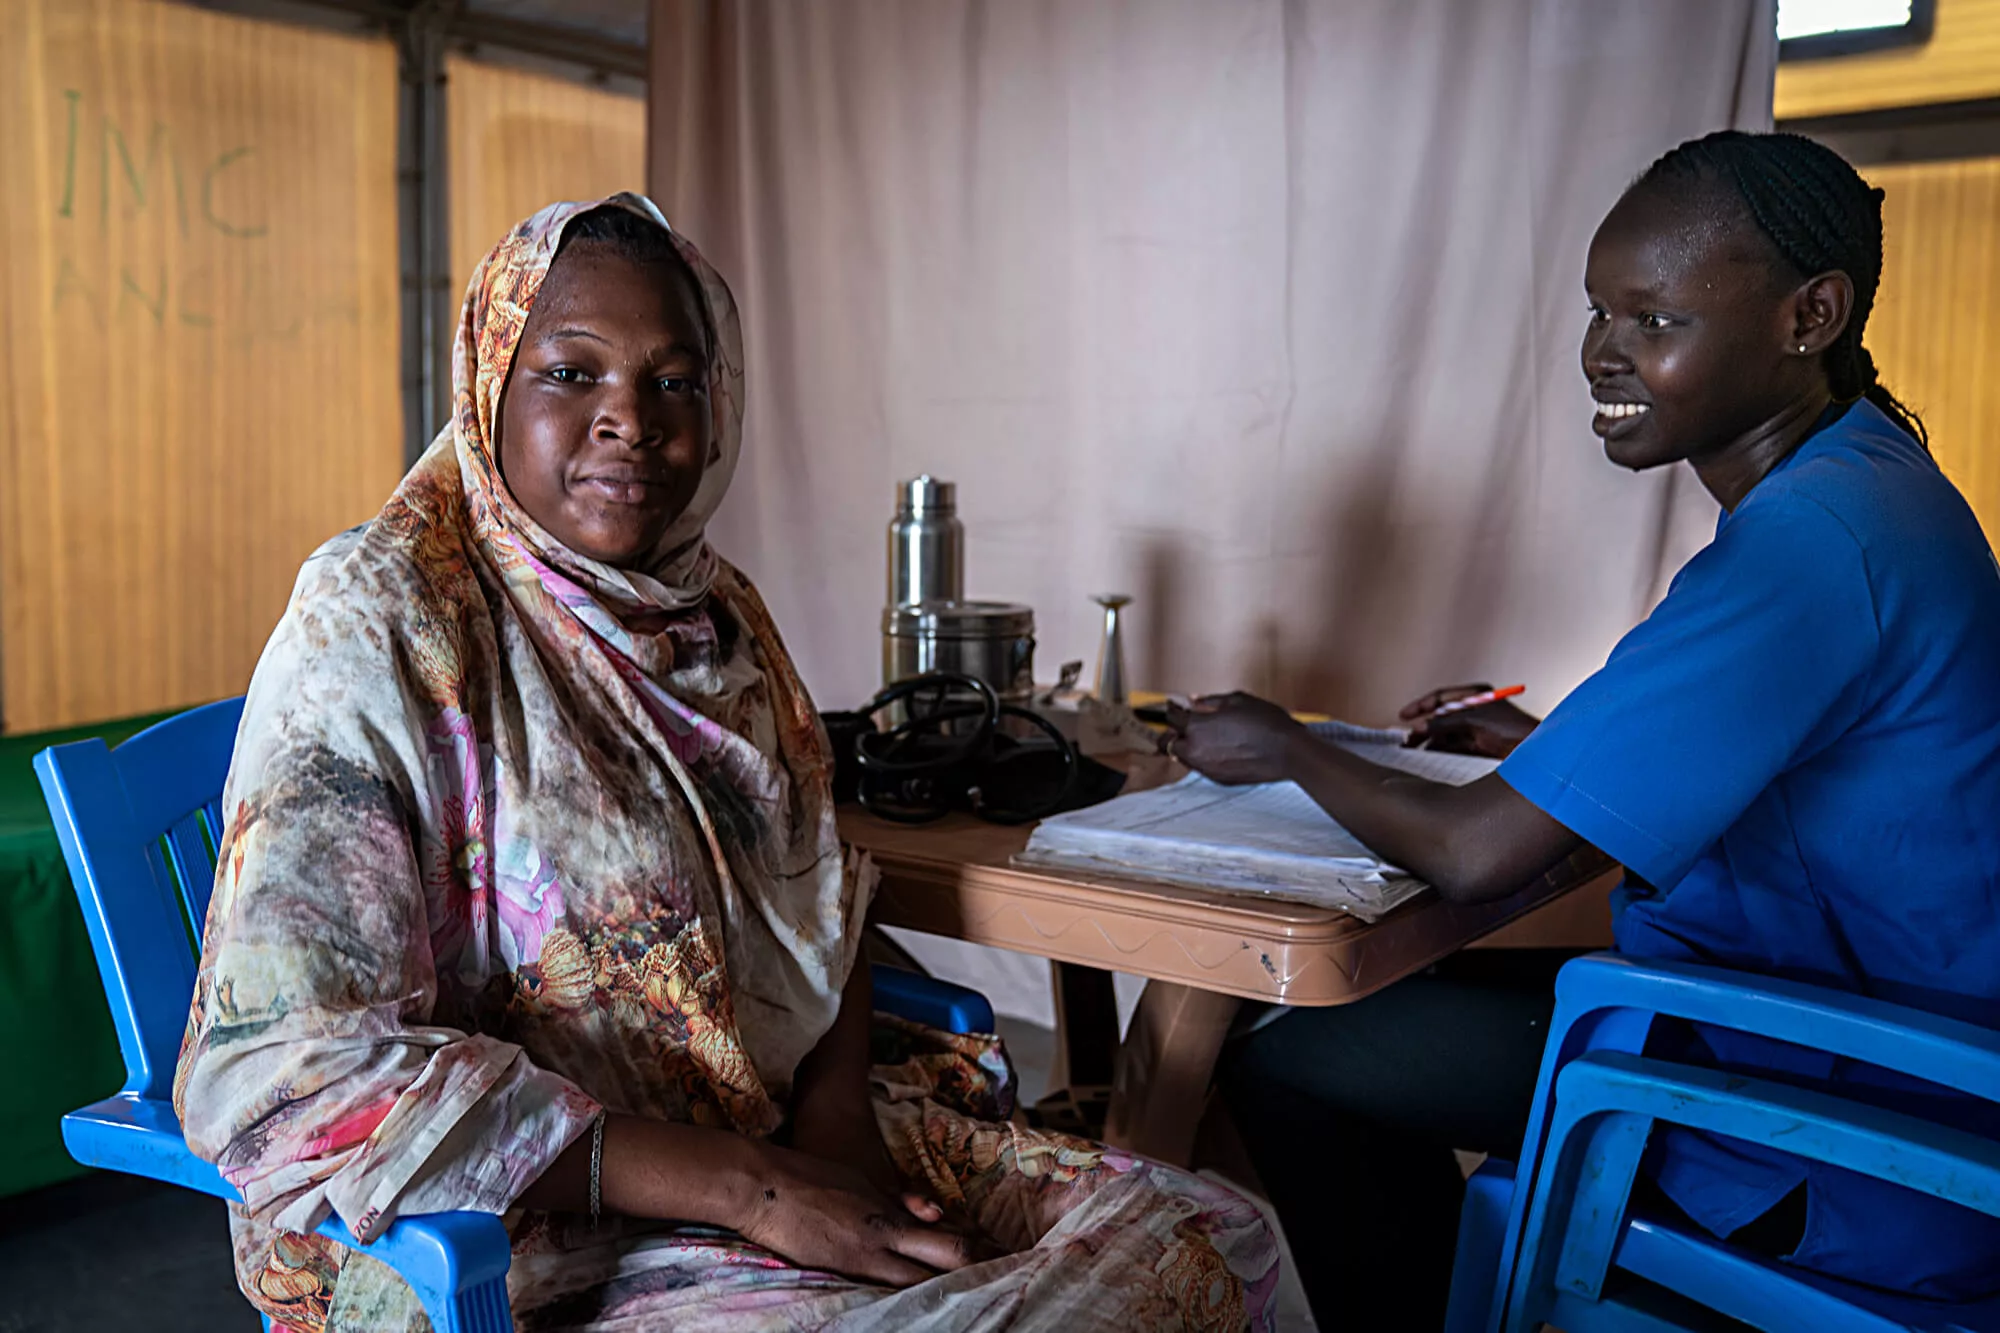 Midwife Nyapin Chol Put conducts a prenatal checkup with a patient at the health clinic in Renk, South Sudan.